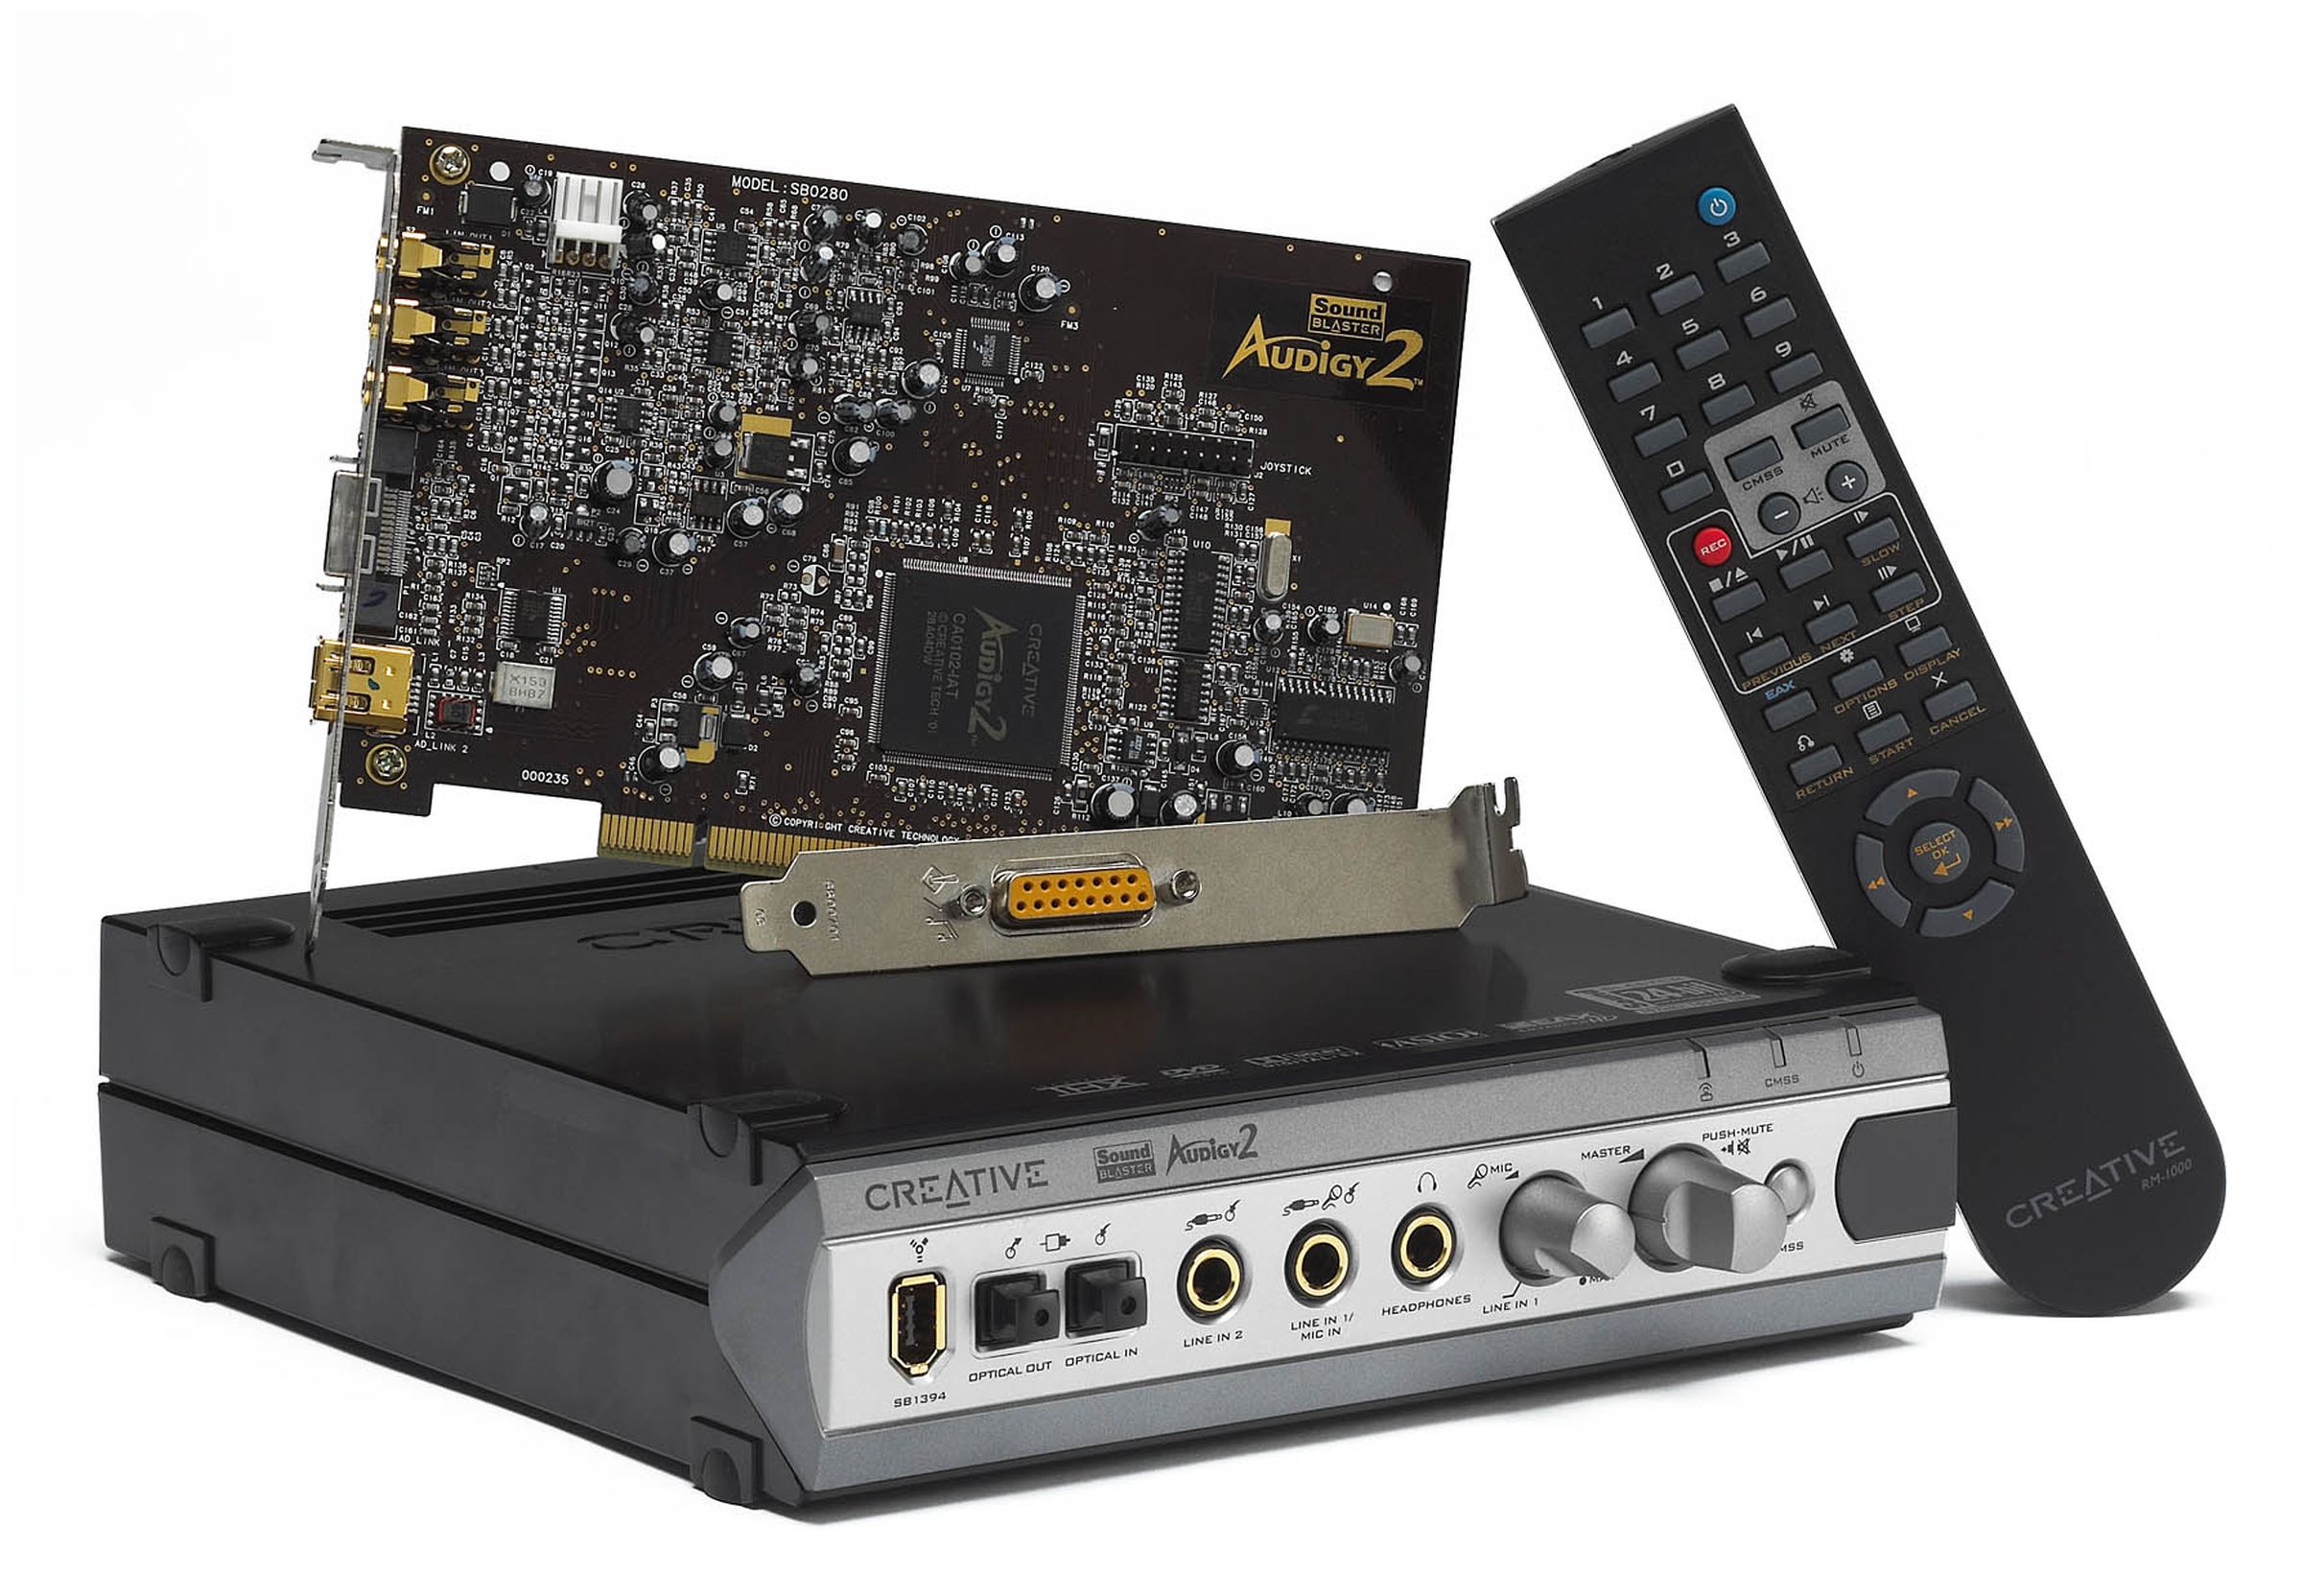 Photo of the Audigy 2 ZS Platinum Pro sound card with outer box and remote.